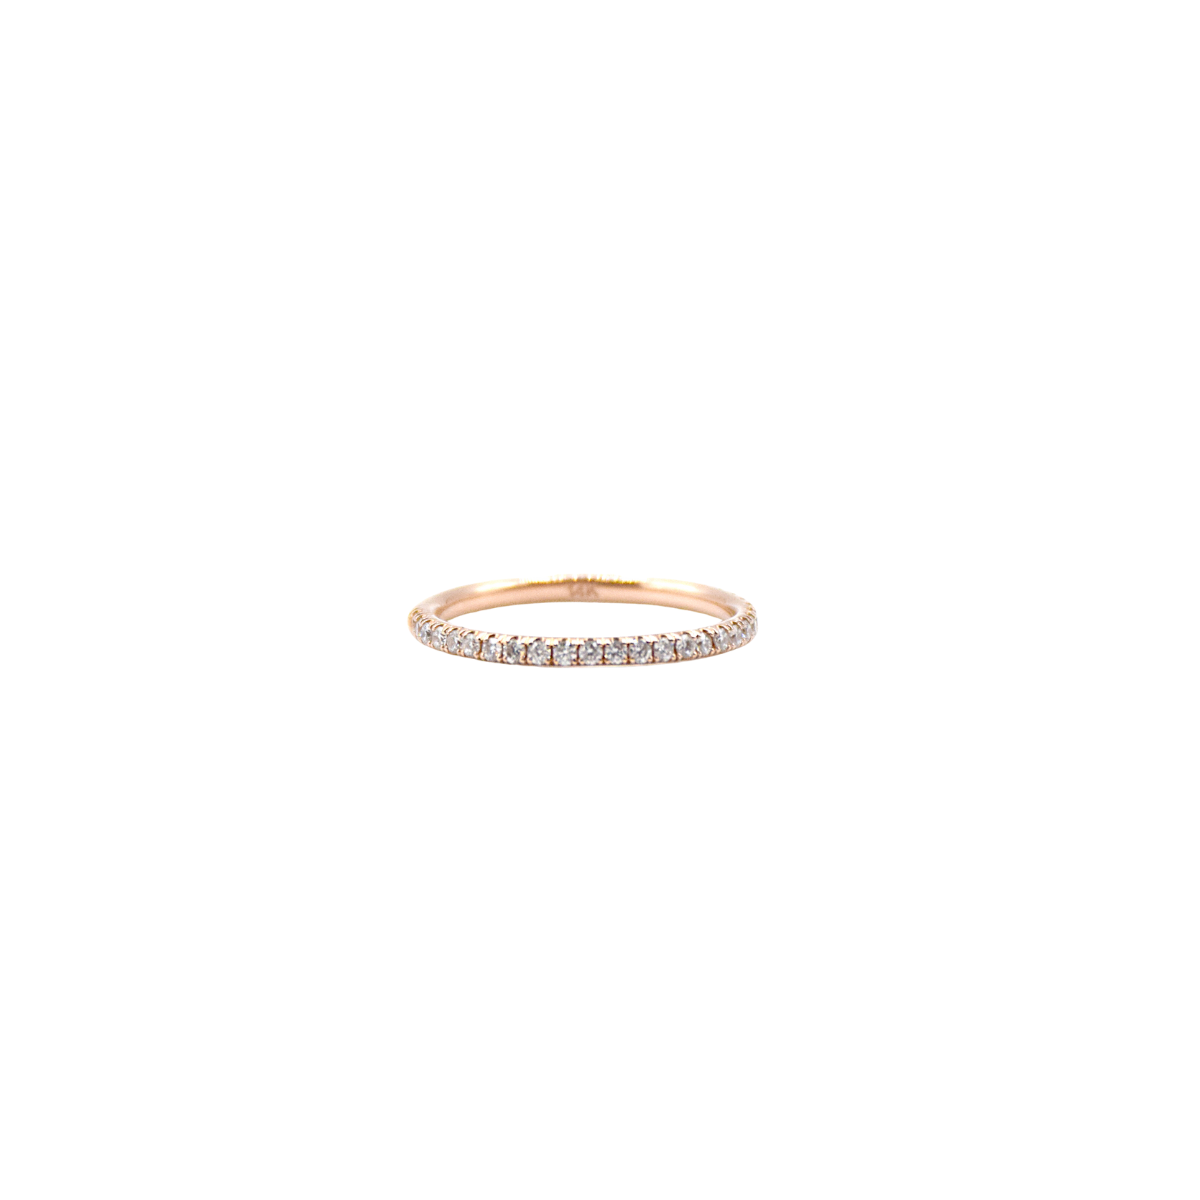 Kannyn January Finity Ring in Rose Gold with White Diamond (size 7)